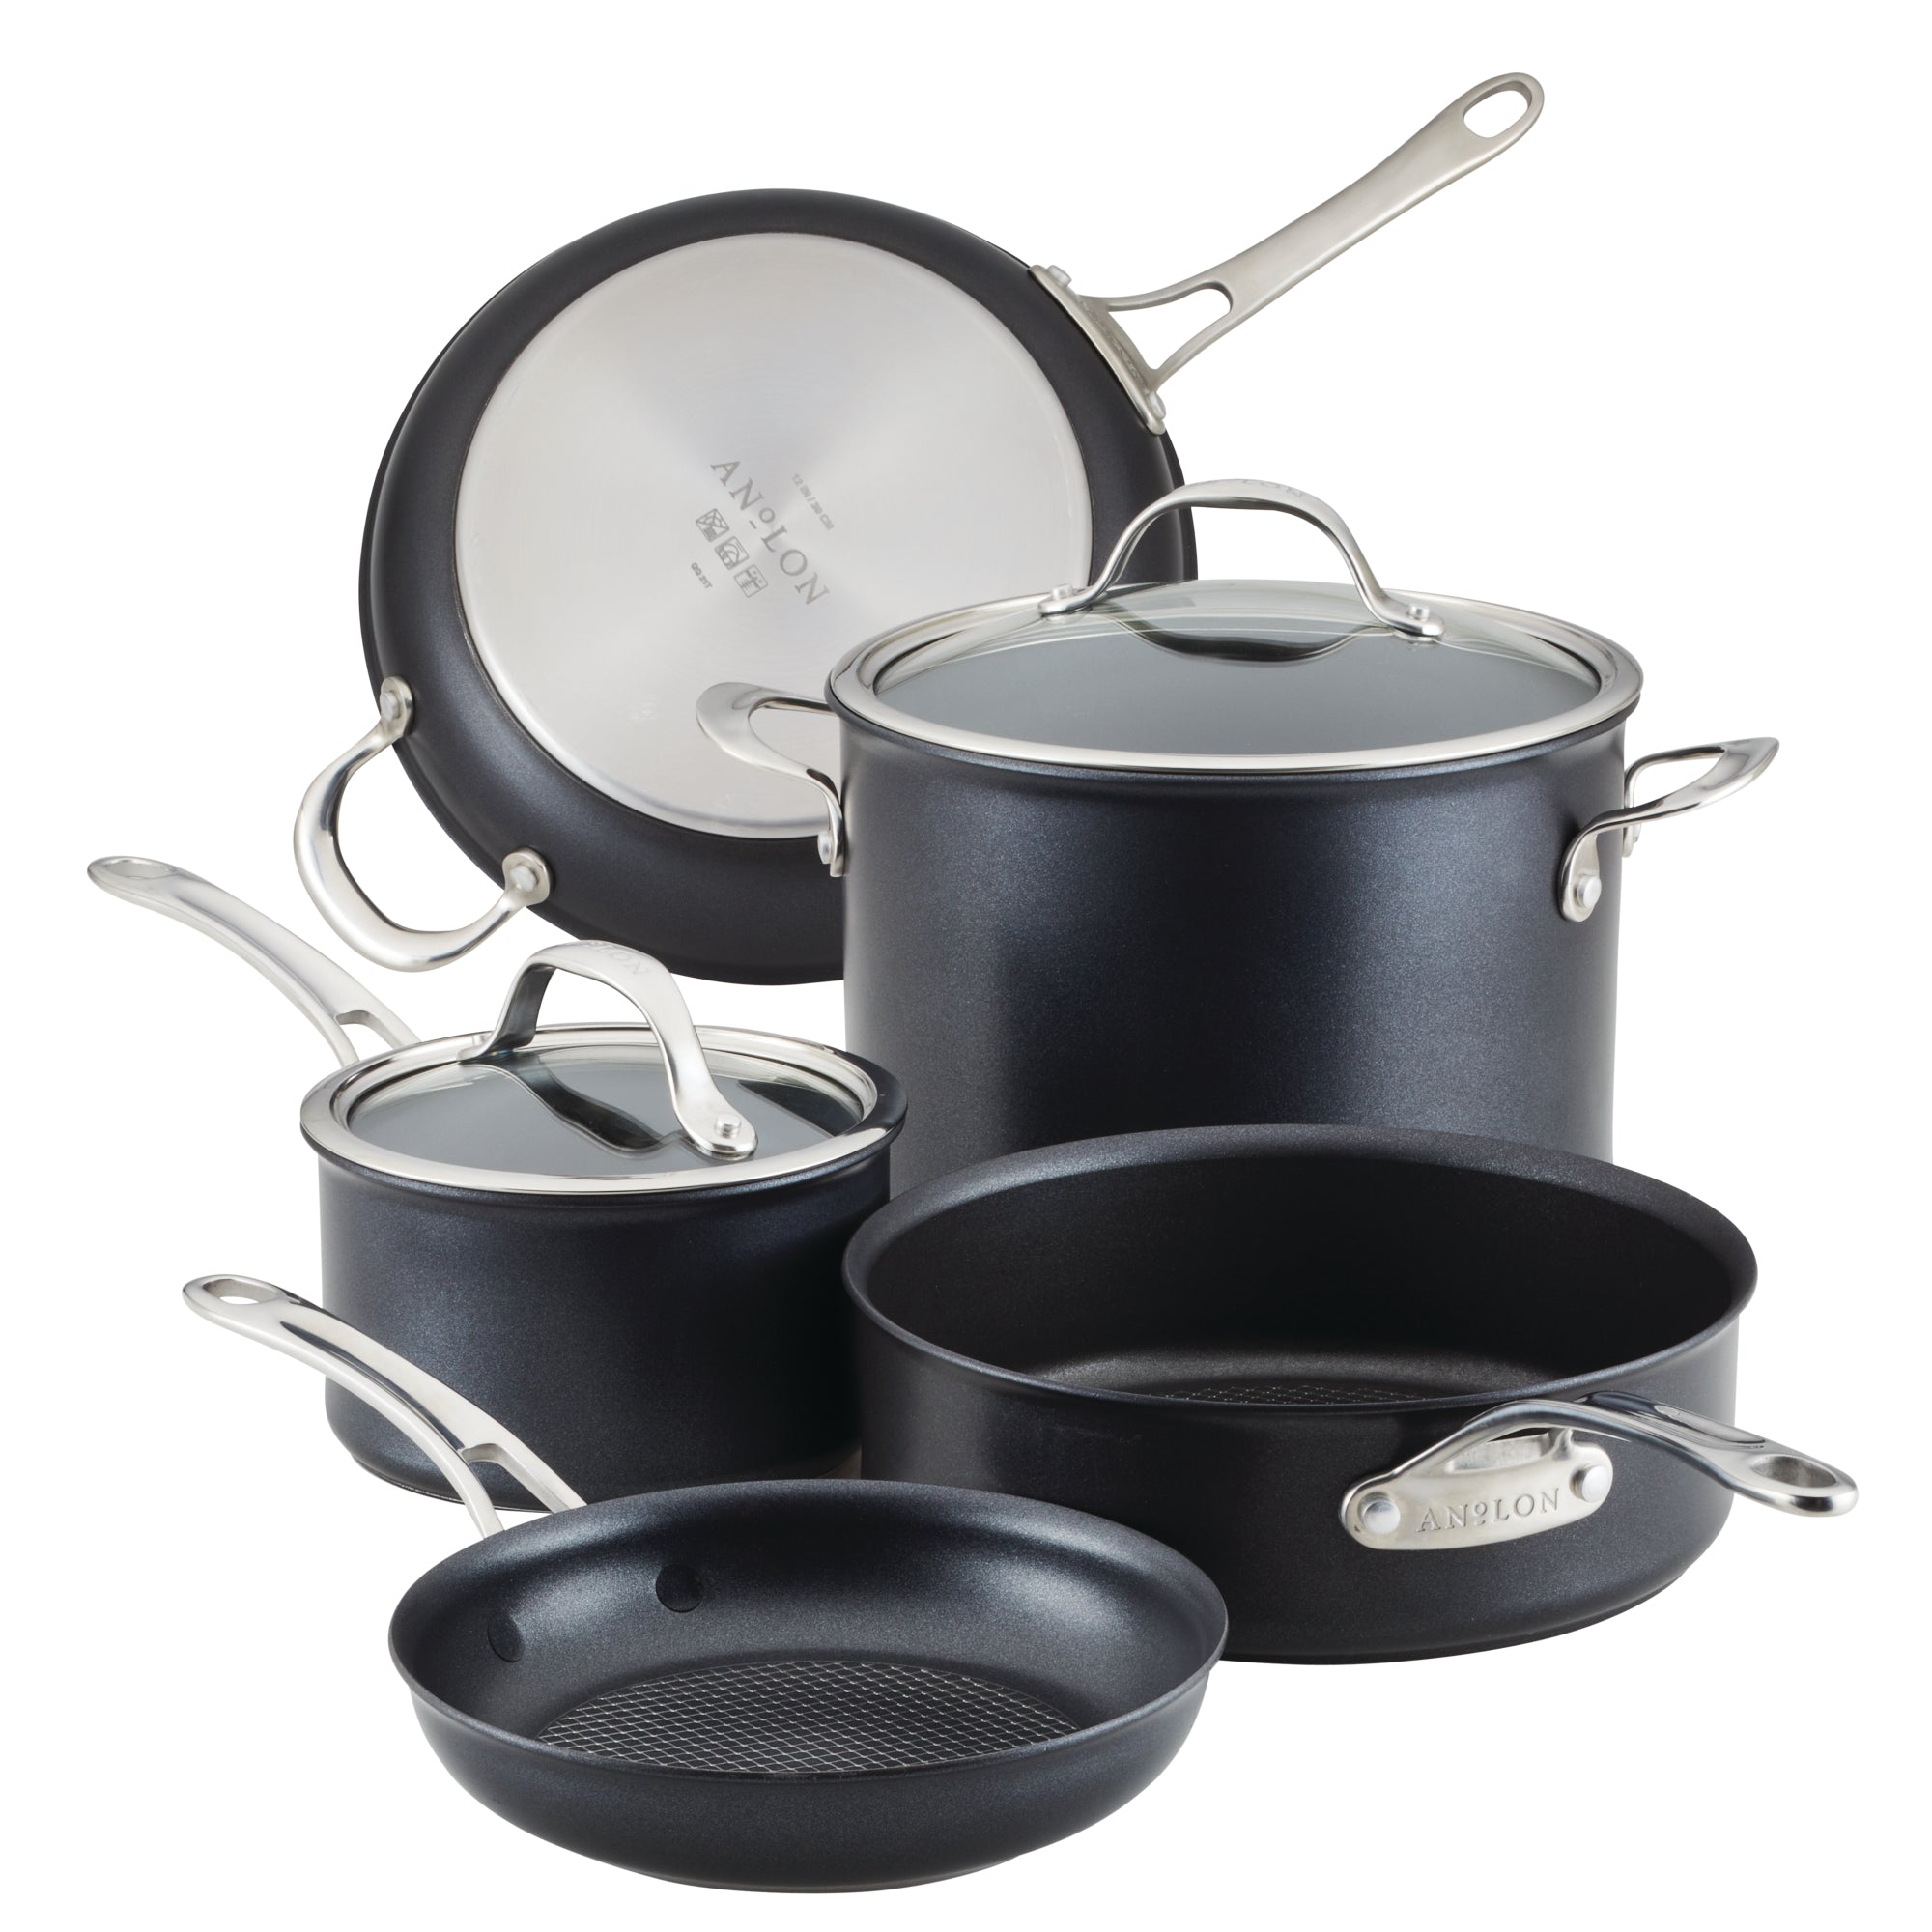 HexClad 10 Piece Hybrid Stainless Steel Cookware Set - 6 Piece Pot Set, 14  Inch Wok, 14 Inch Frying Pan with Lid, Stay Cool Handles, Dishwasher Safe